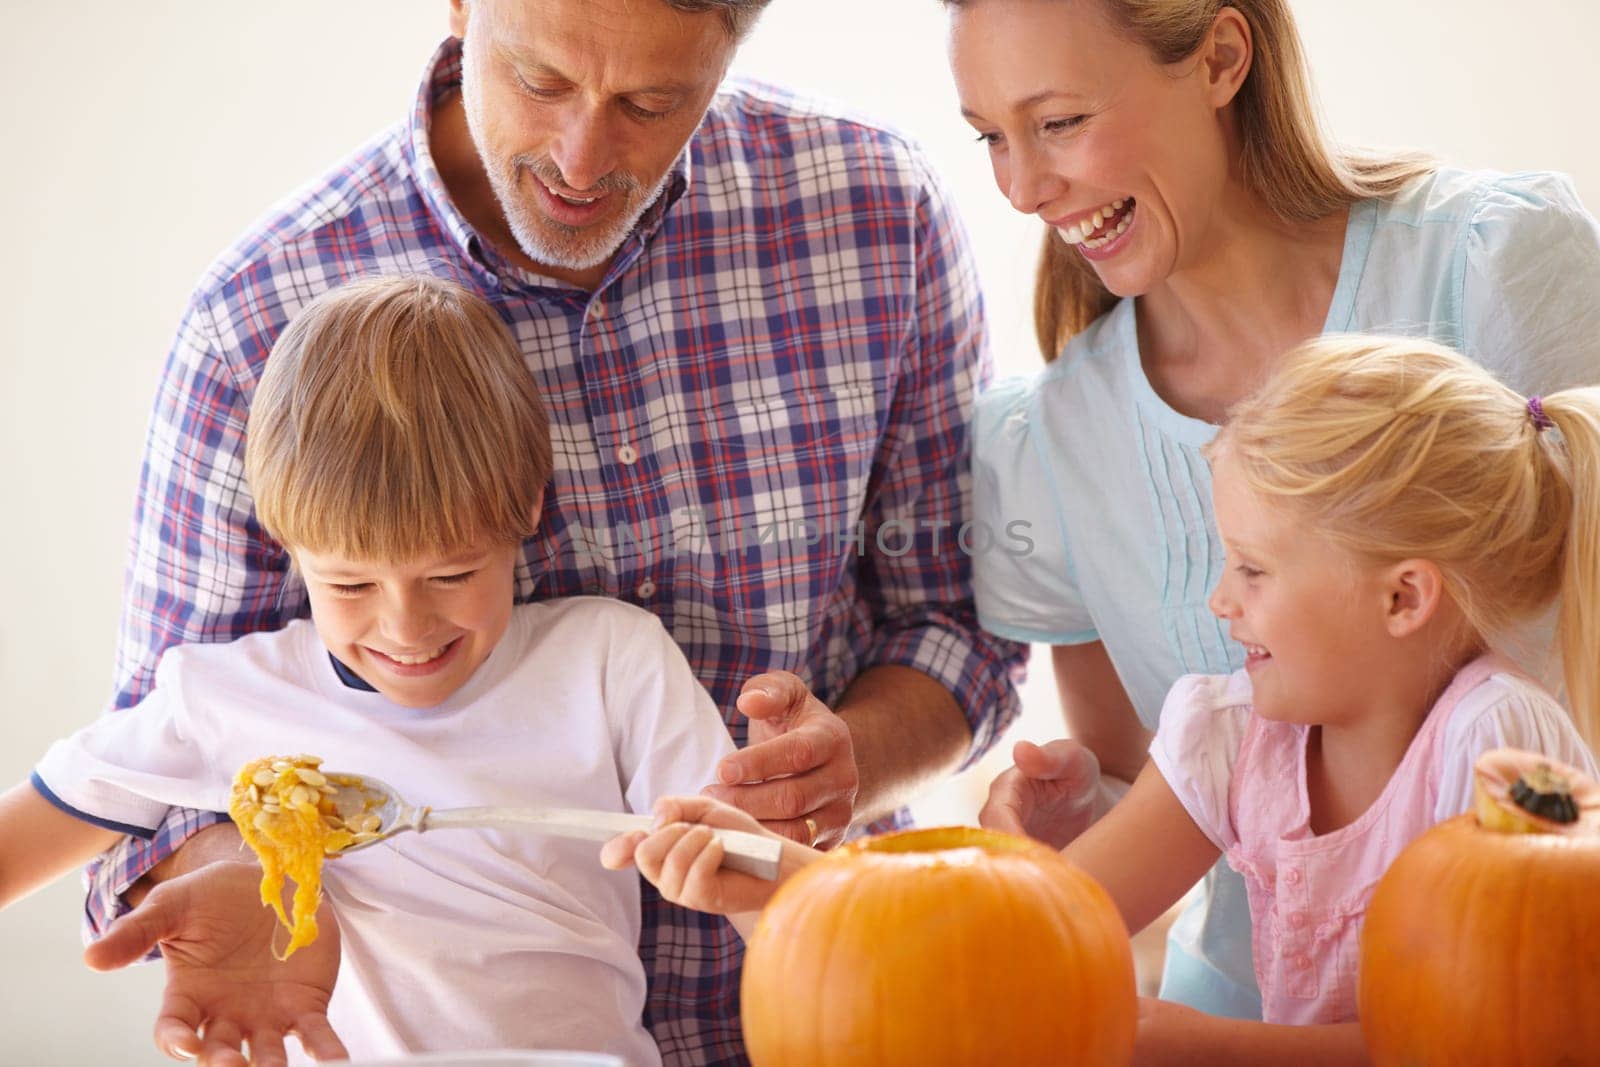 Halloween, family fun and carving a pumpkin with children in a home for bonding and helping with craft. Man and woman or parents and young kids together for creativity, holiday lantern and happy.